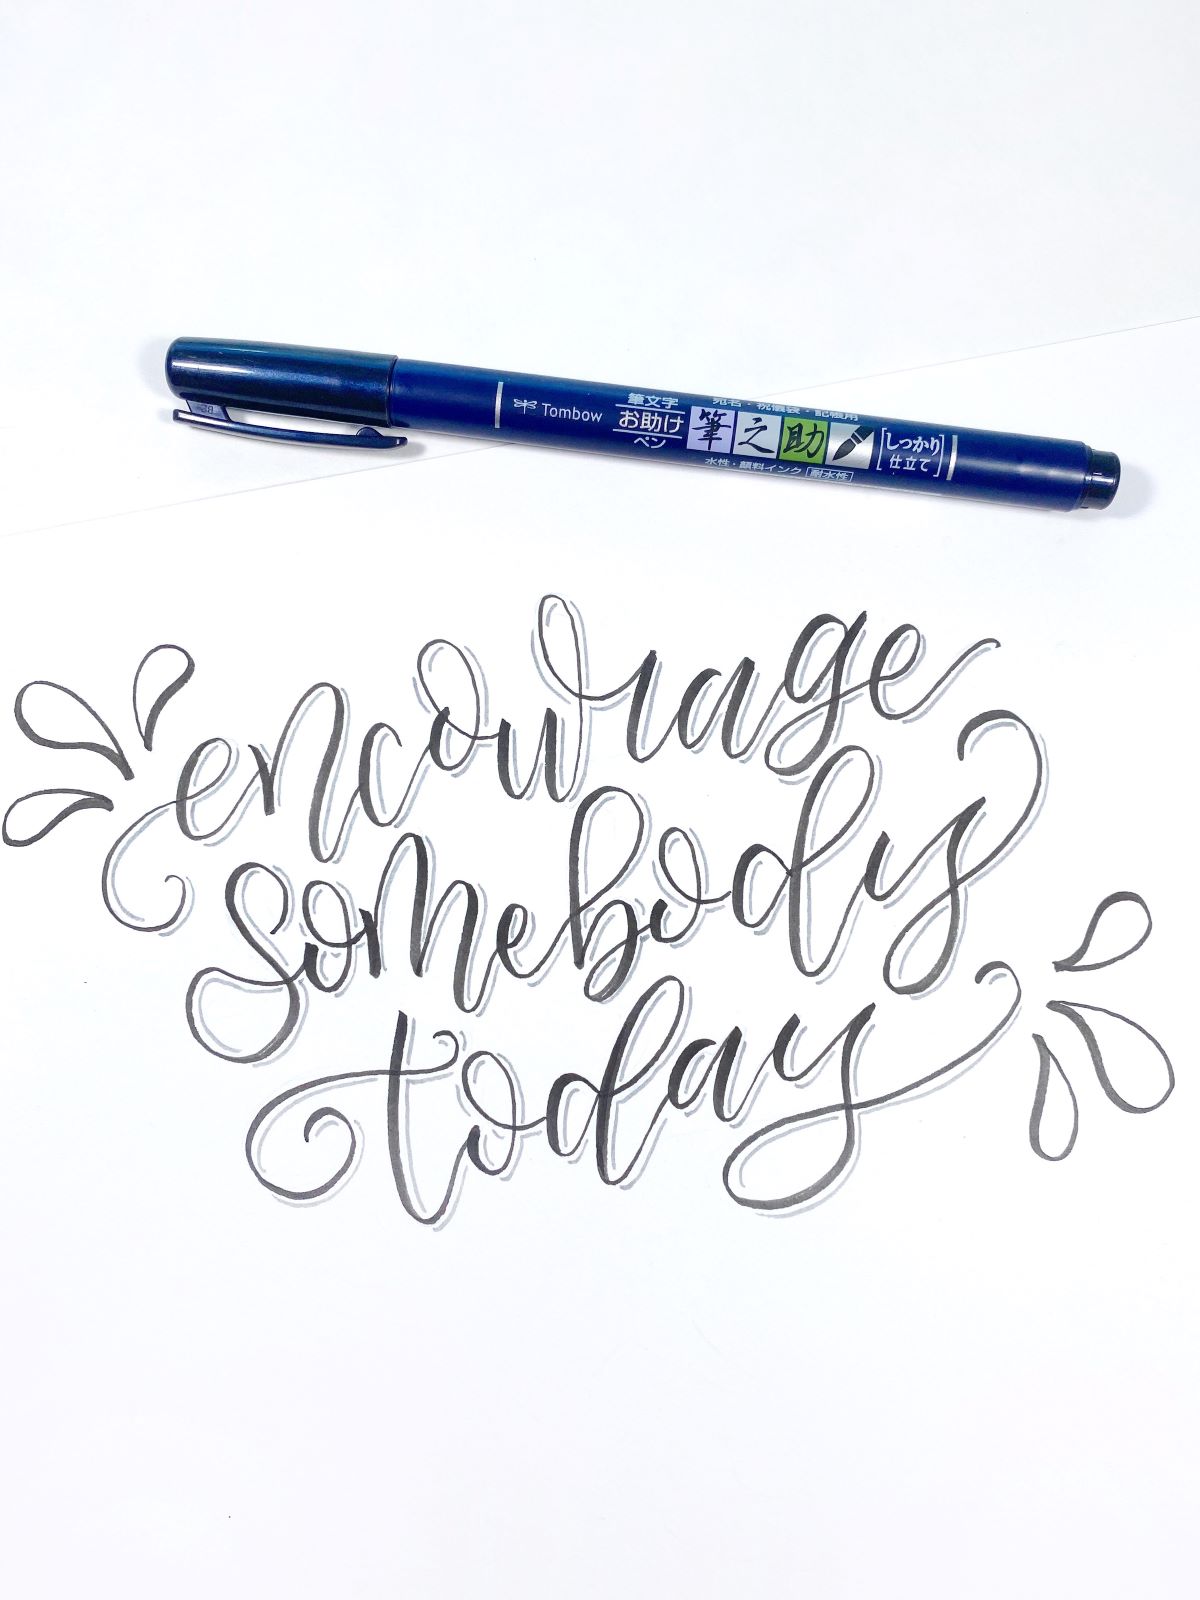 Tombow's Top 5 Tools For Lettering! #tombow #lettering